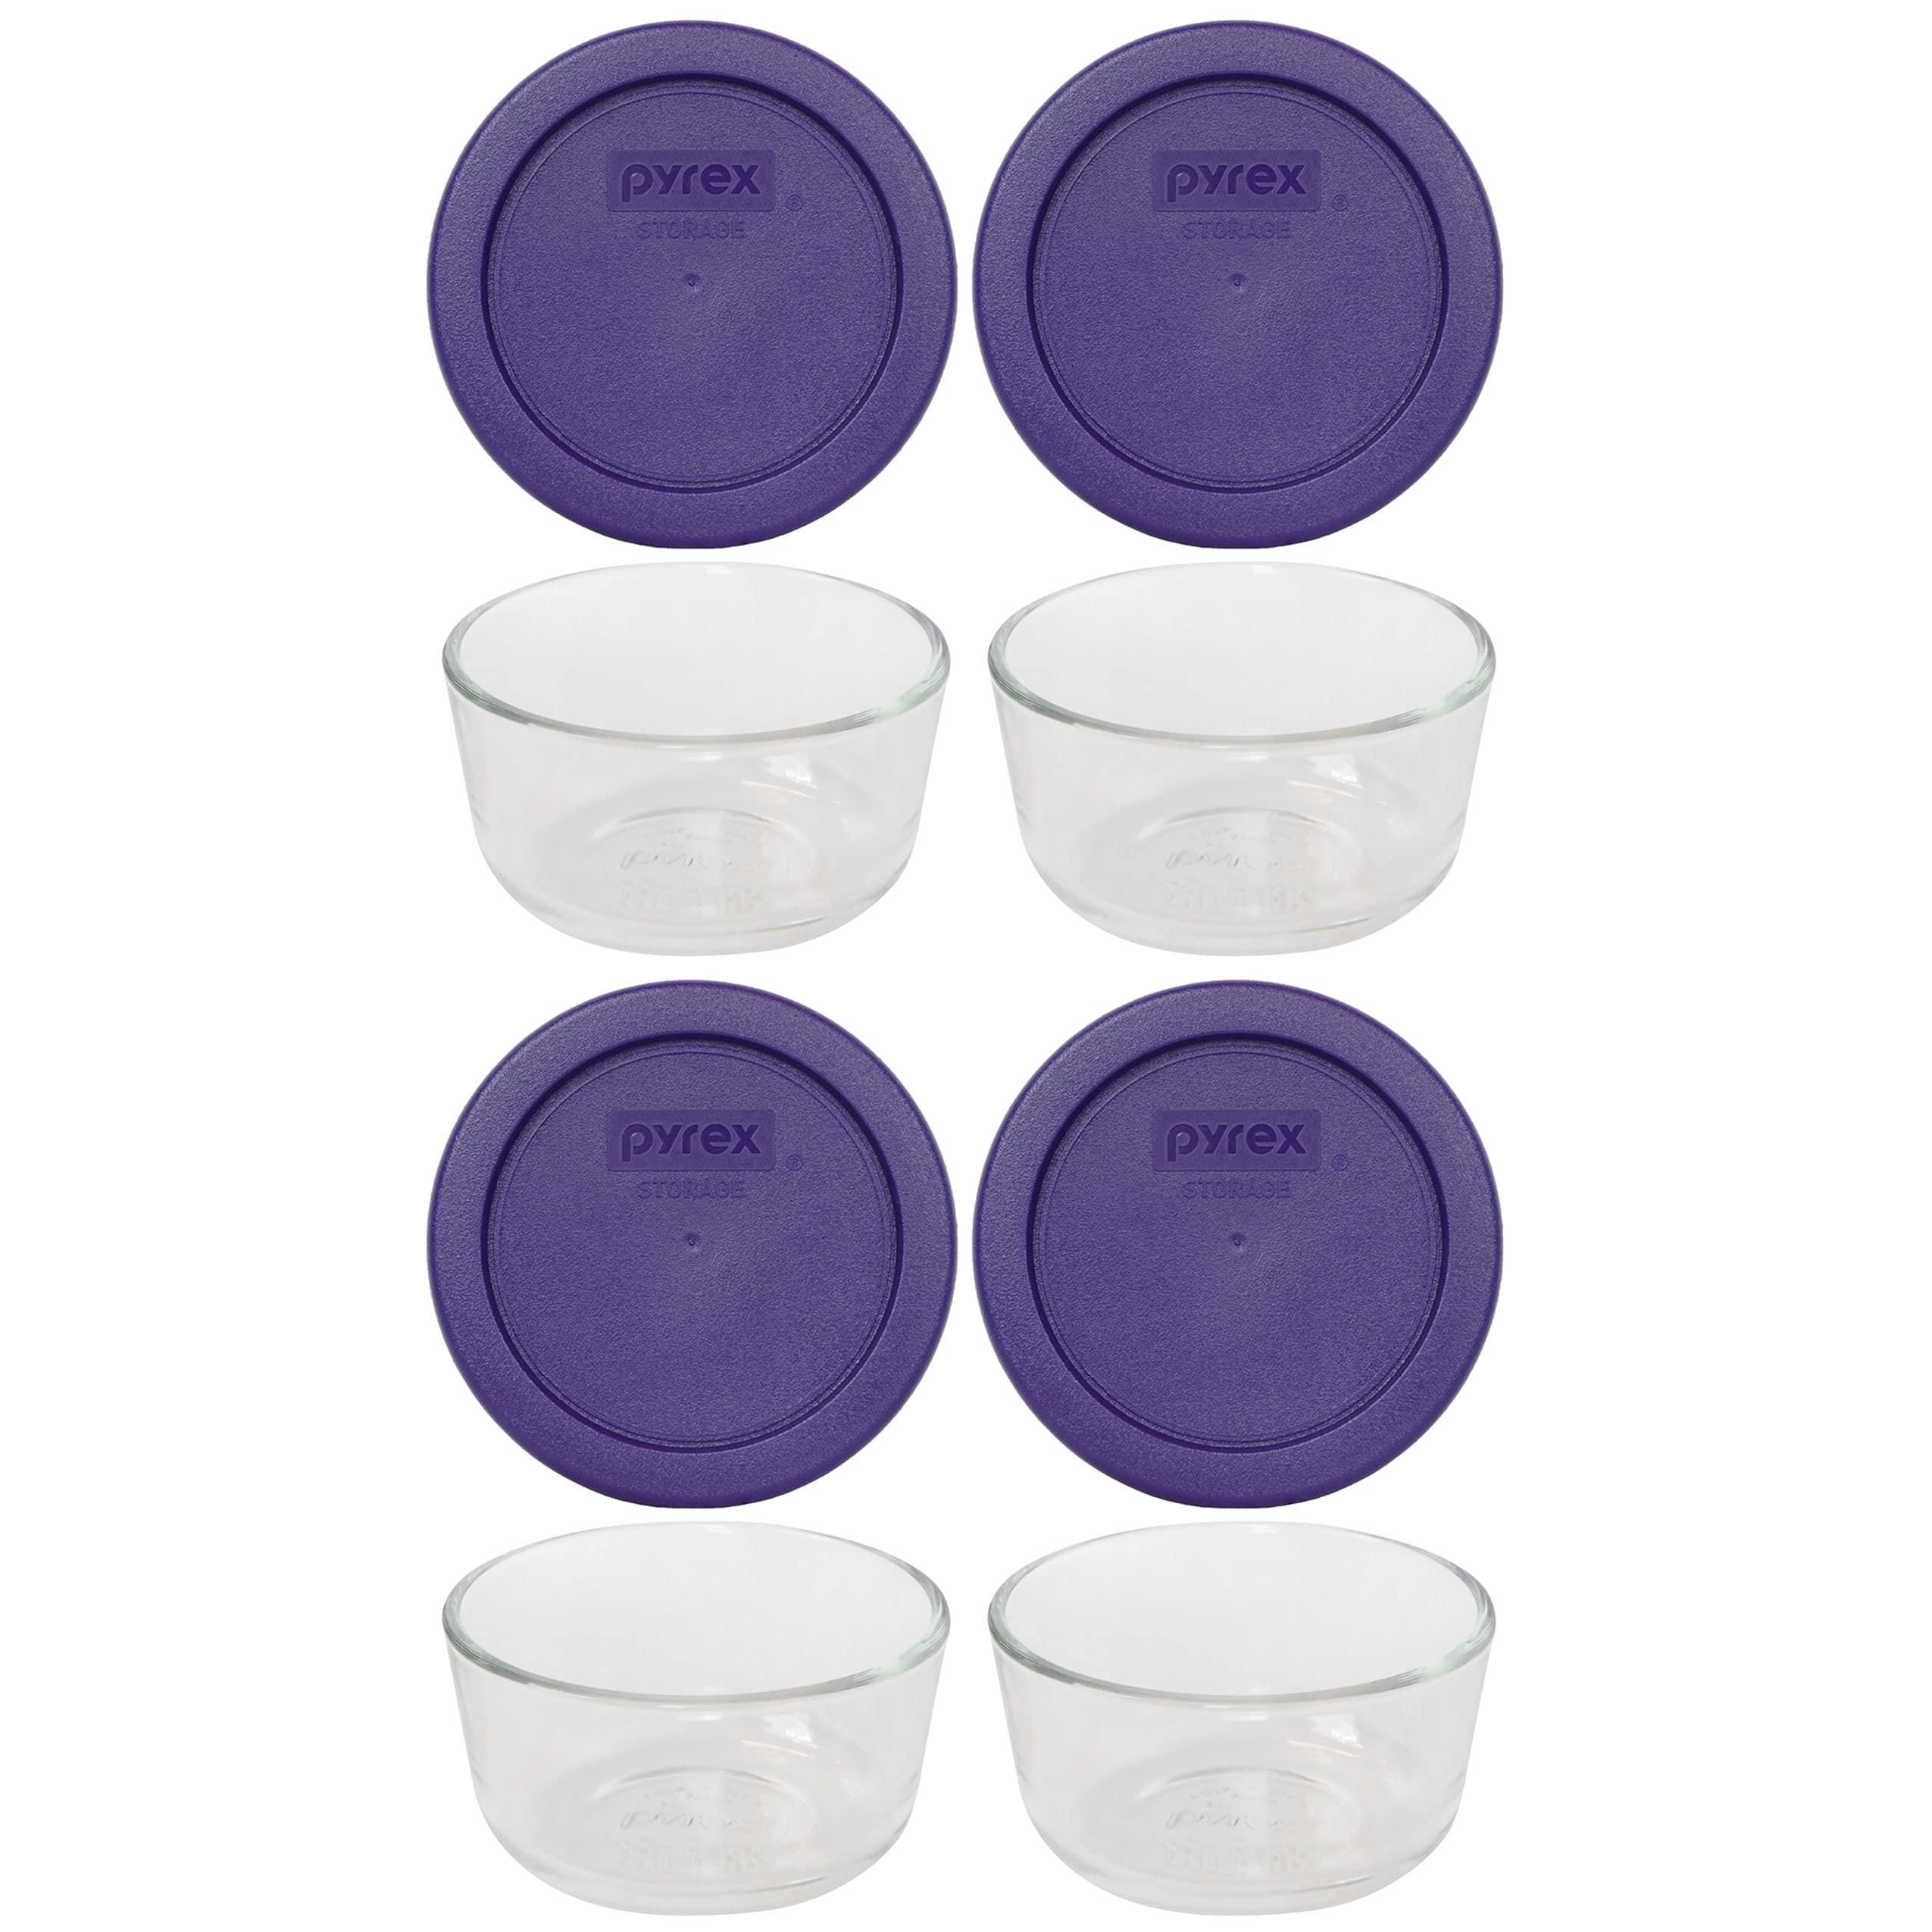 Pyrex (4 7202 Glass Bowls & (4) 7202-PC Plum Purple Lids Made in the USA